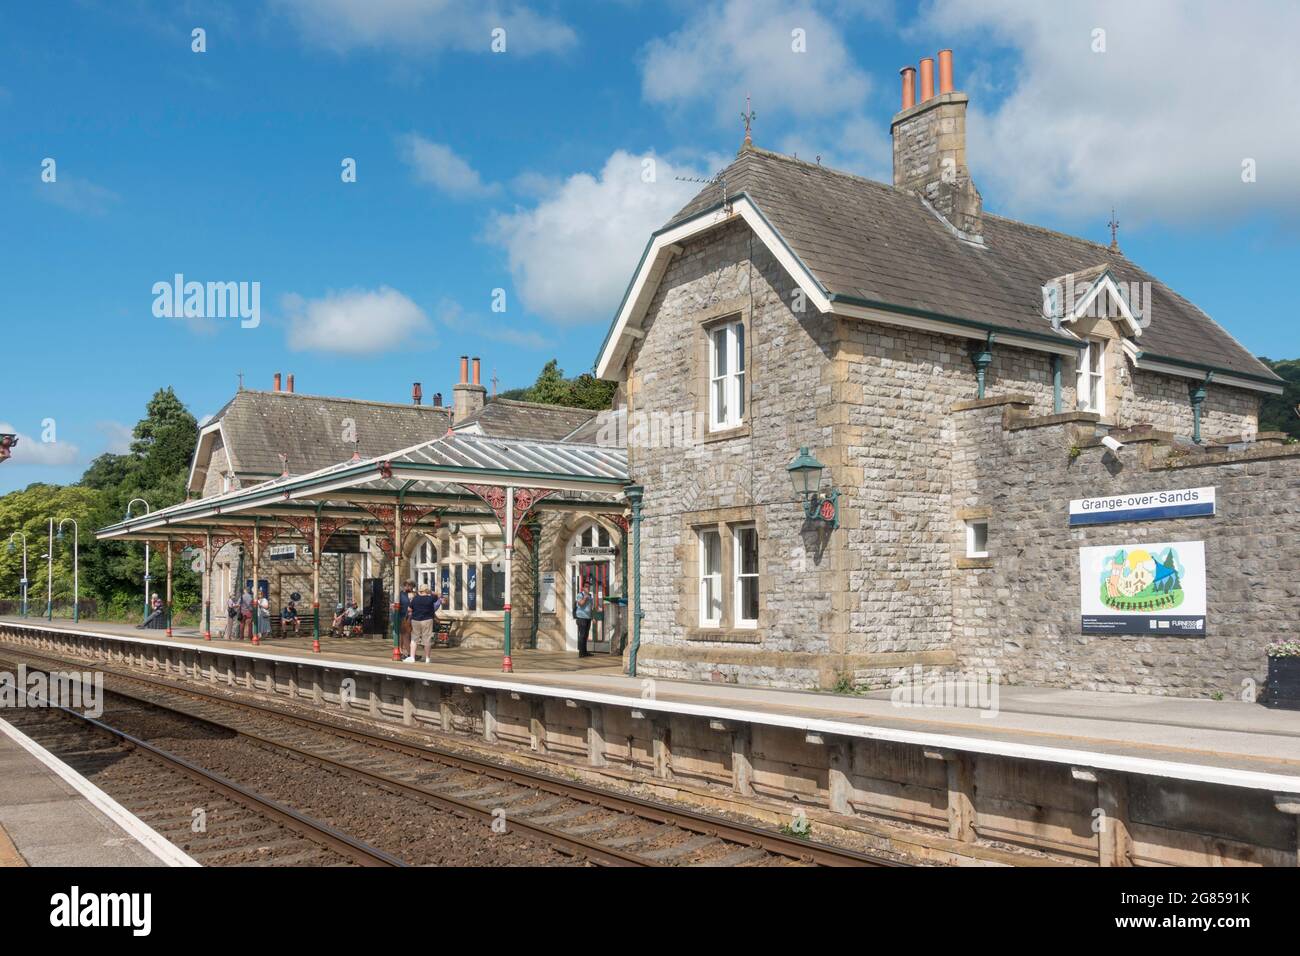 People waiting on the railway station in Grange Over Sands, Cumbria, England, UK Stock Photo